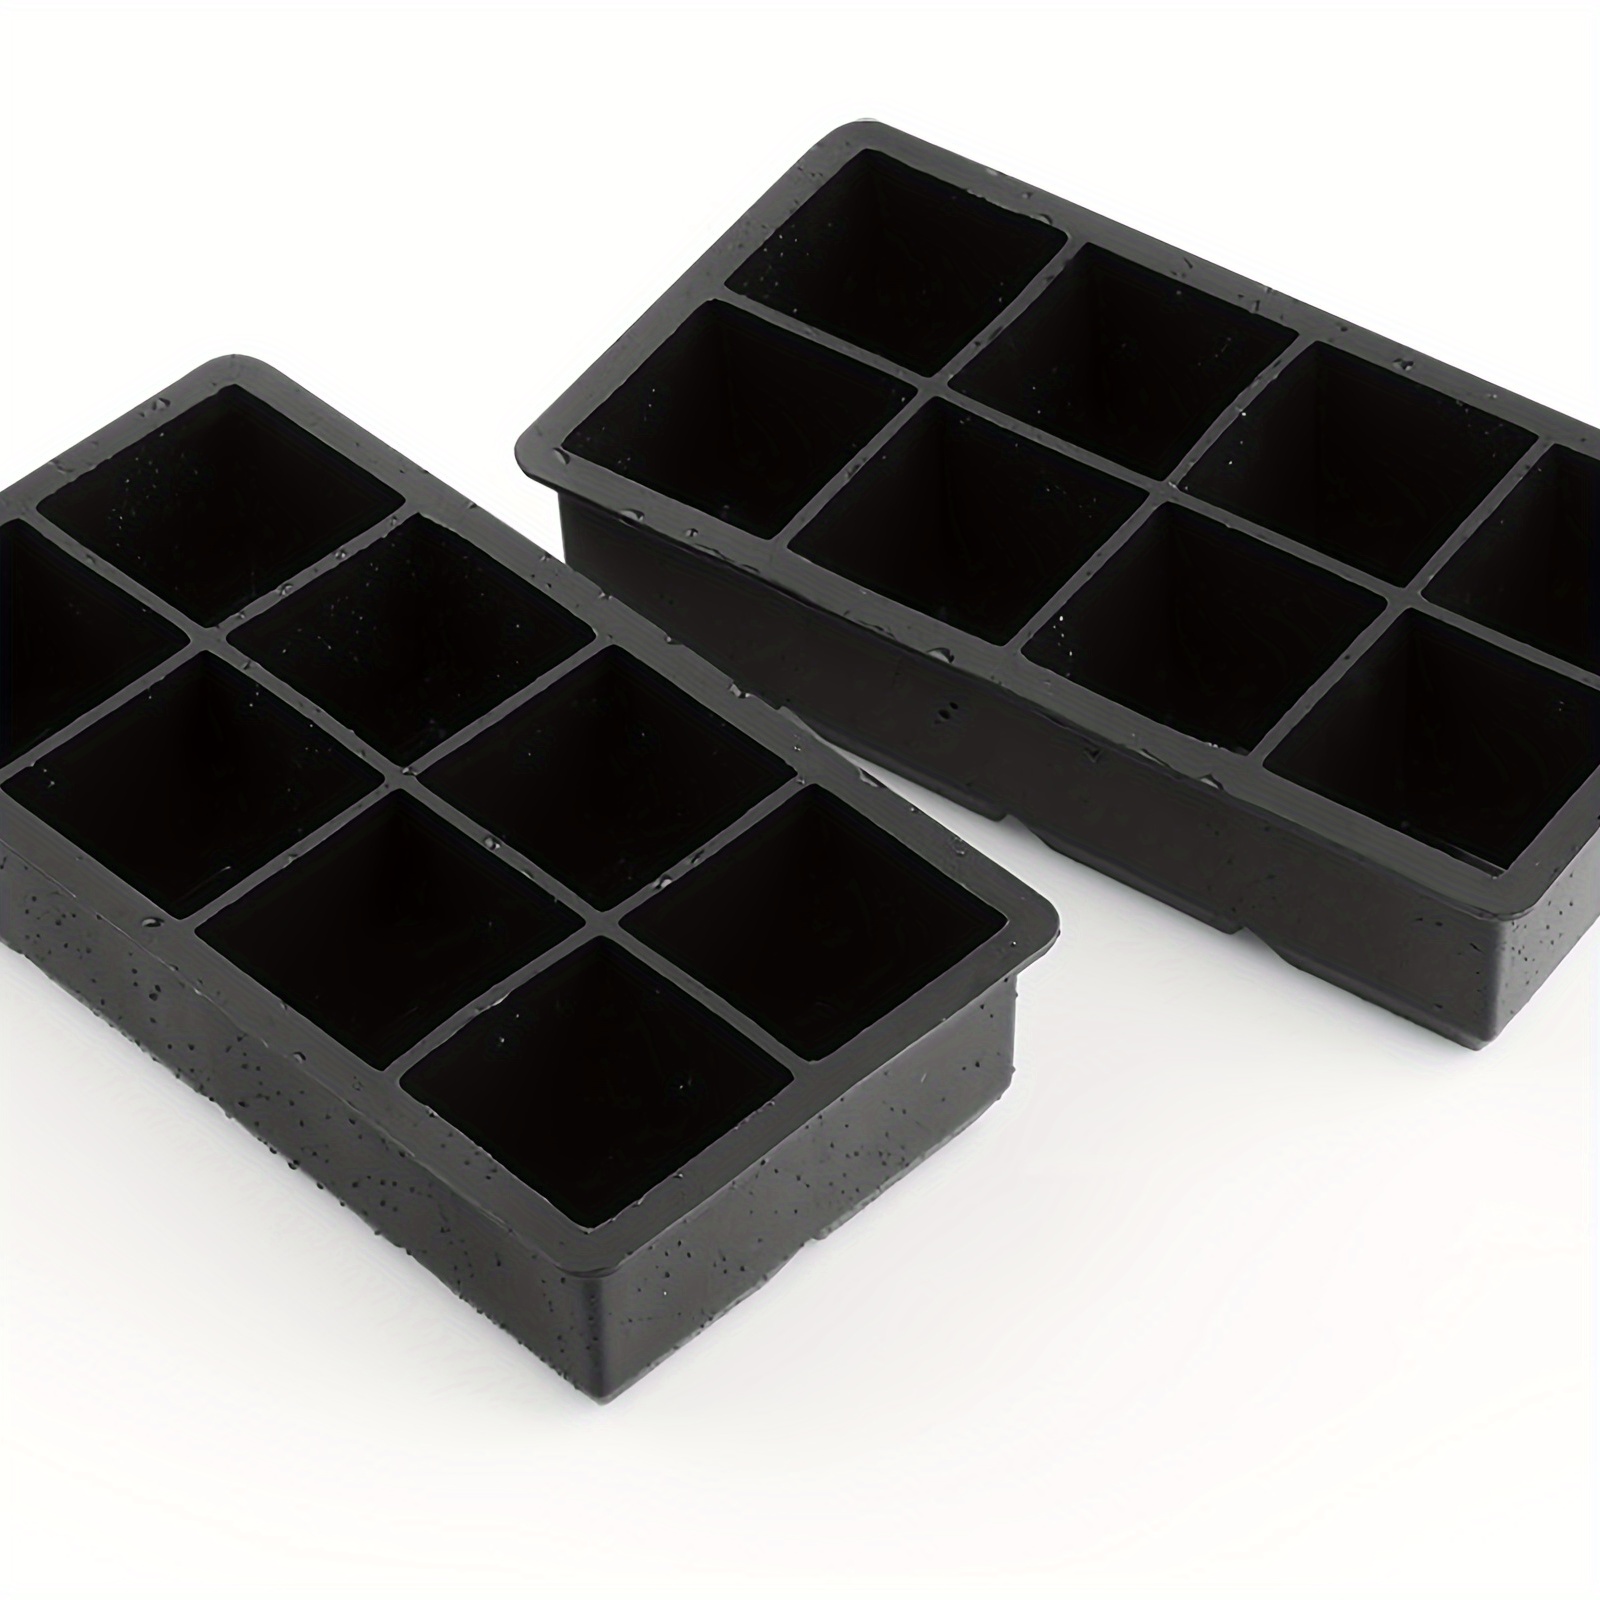 2pcs Silicone Ice Cube Trays,Easy Release Large Ice Cube Tray,Ice